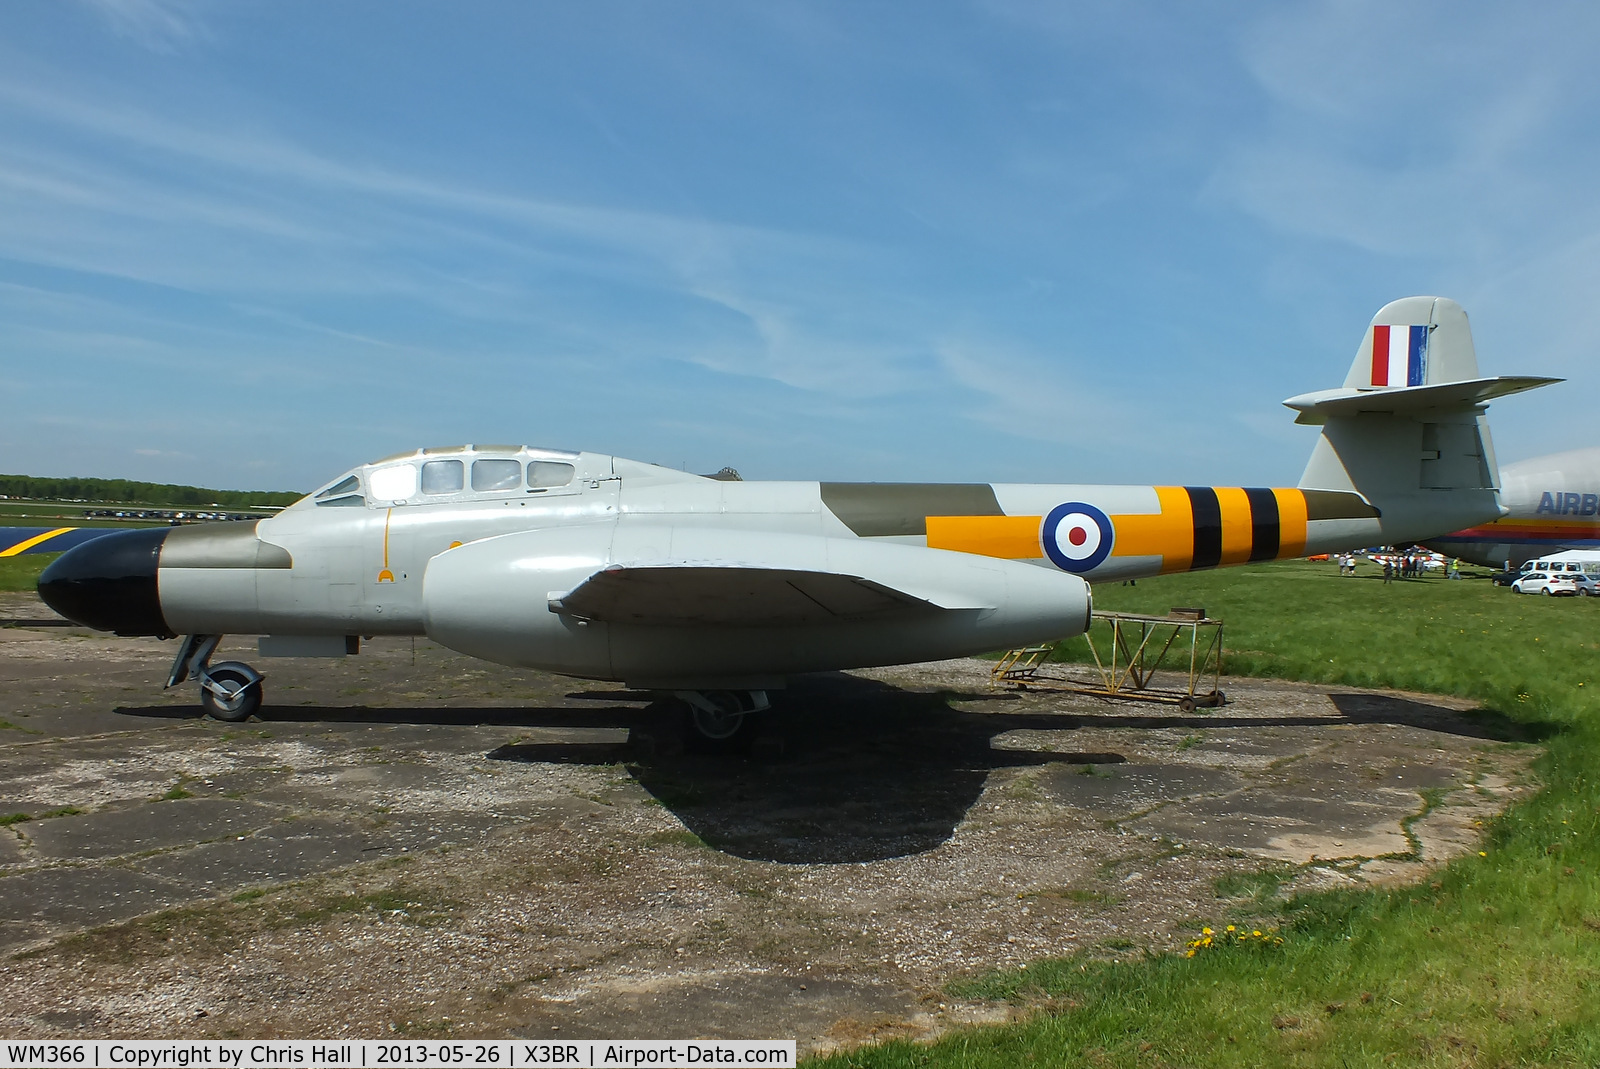 WM366, 1953 Gloster Meteor NF.13 C/N 5616, at the Cold War Jets open day, Bruntingthorpe